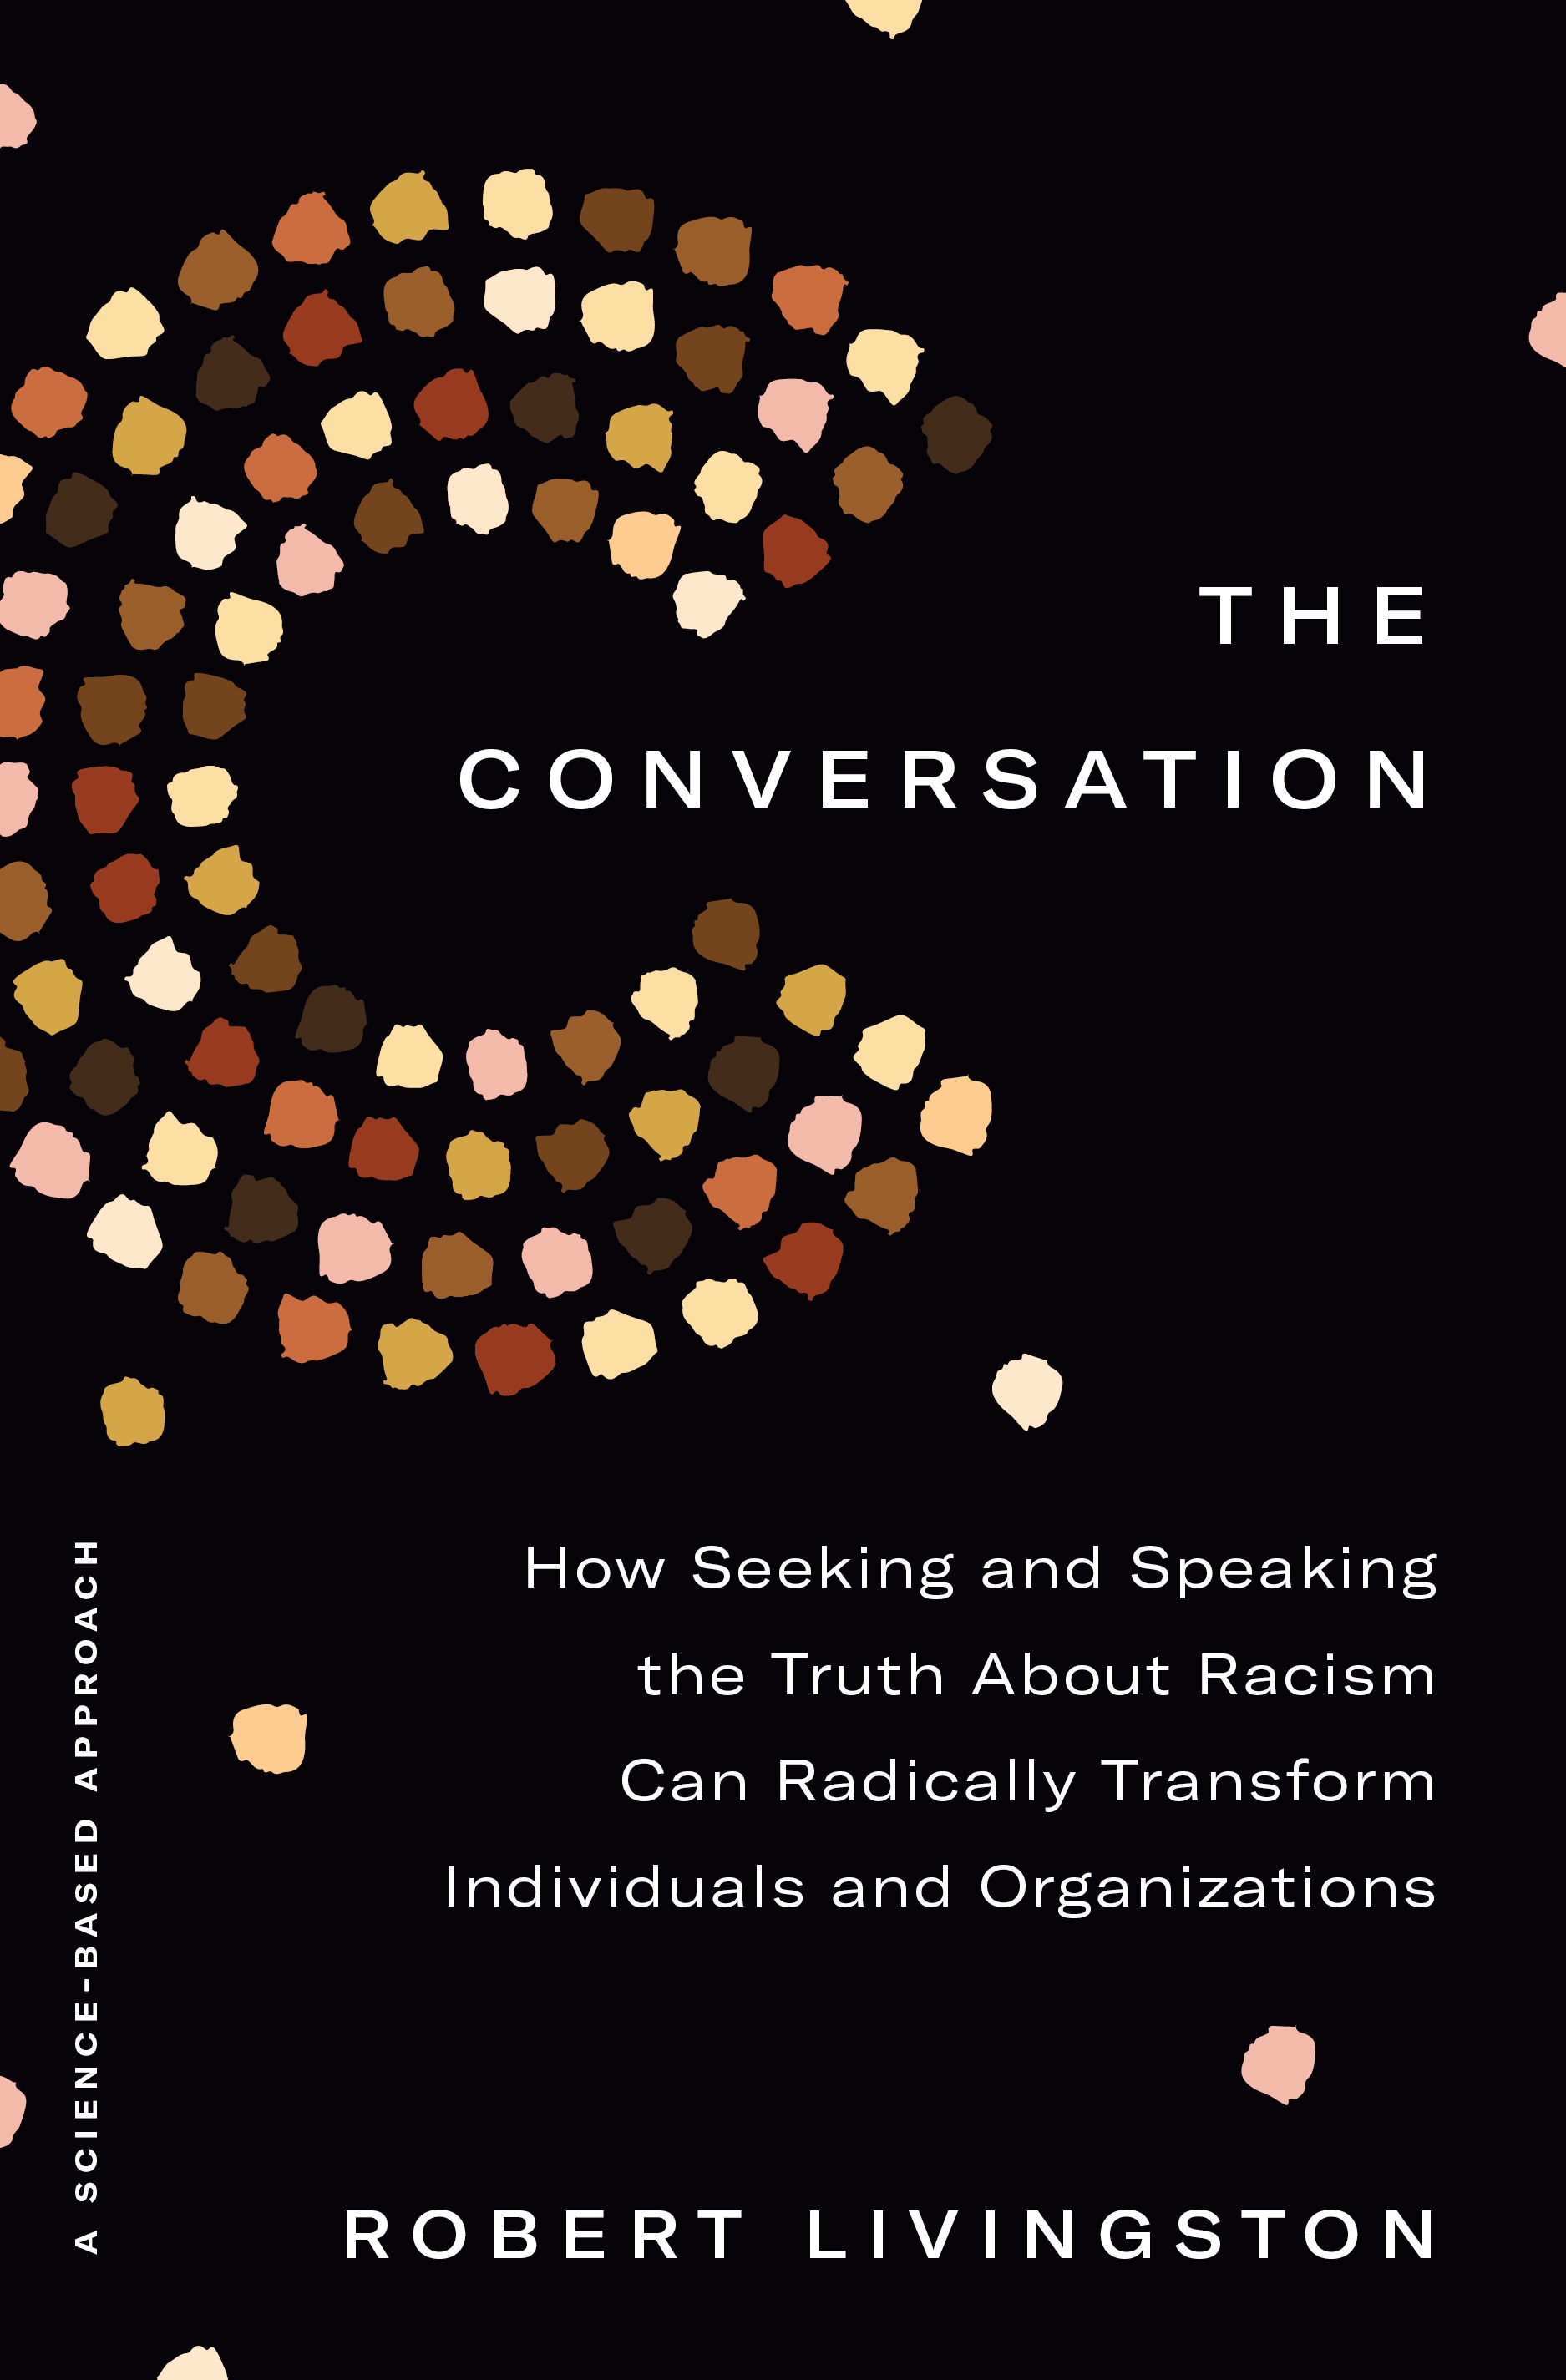 Community Conversation with Robert Livingston, Author of The